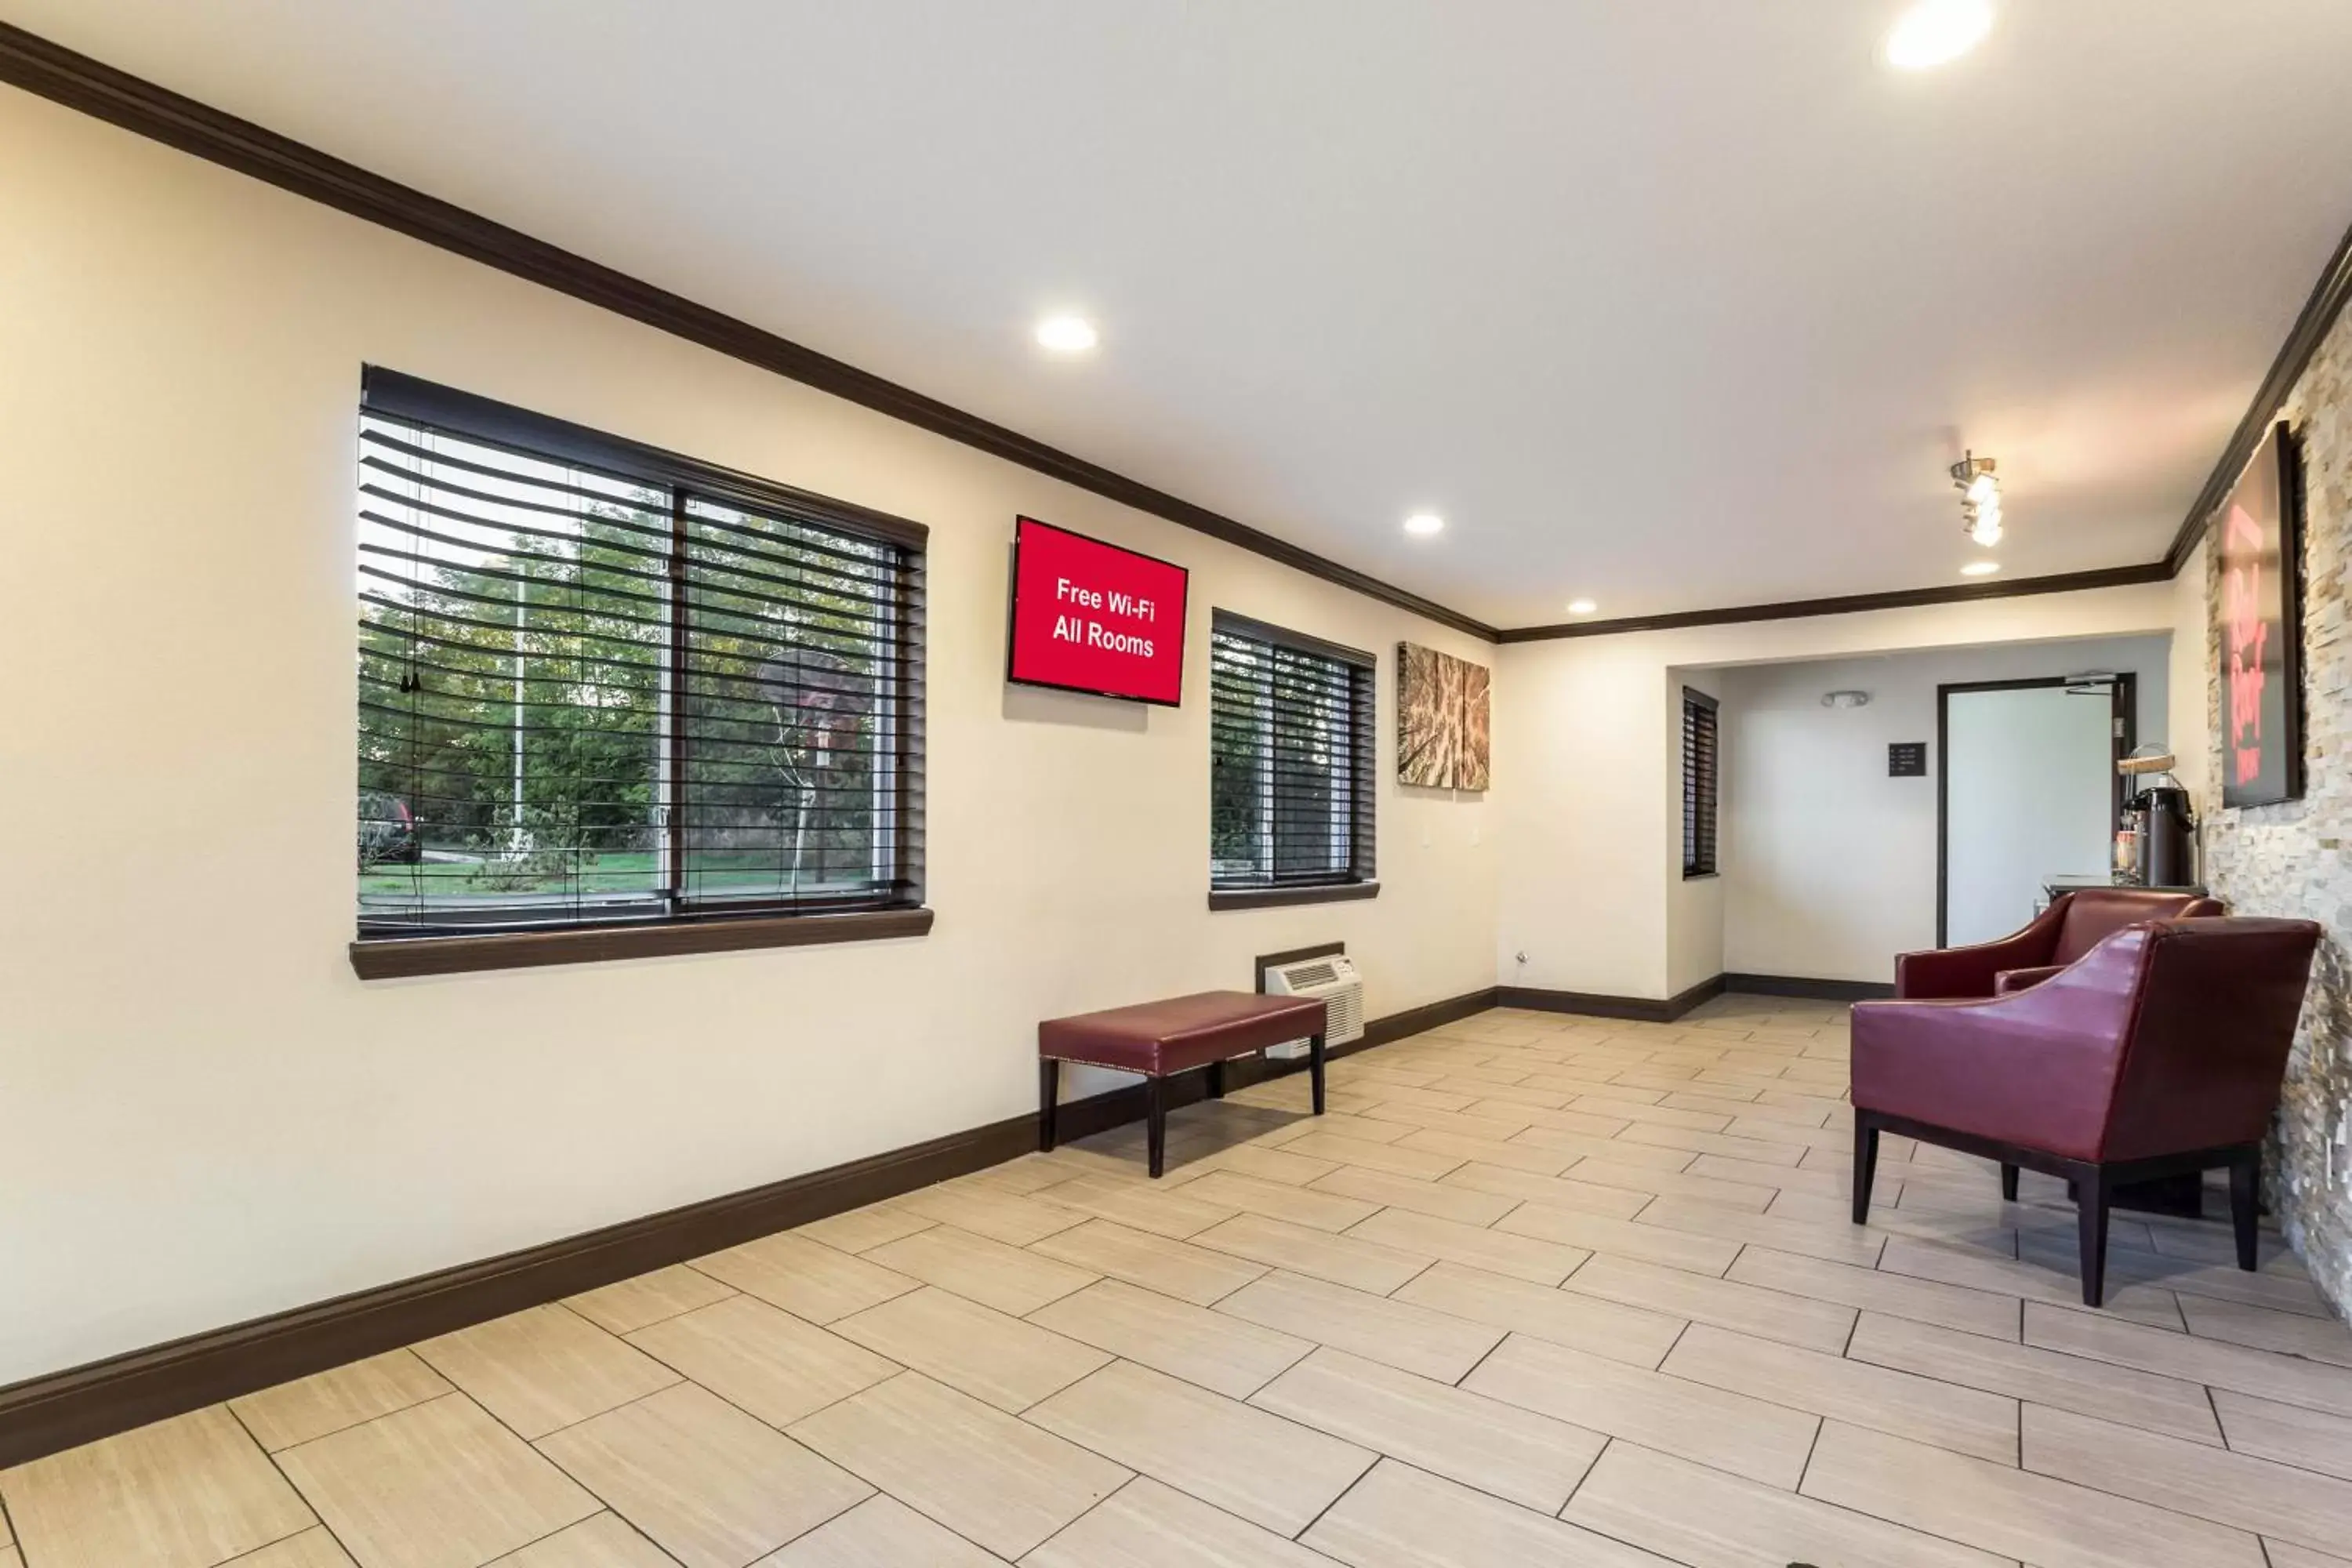 Lobby or reception in Red Roof Inn Dry Ridge